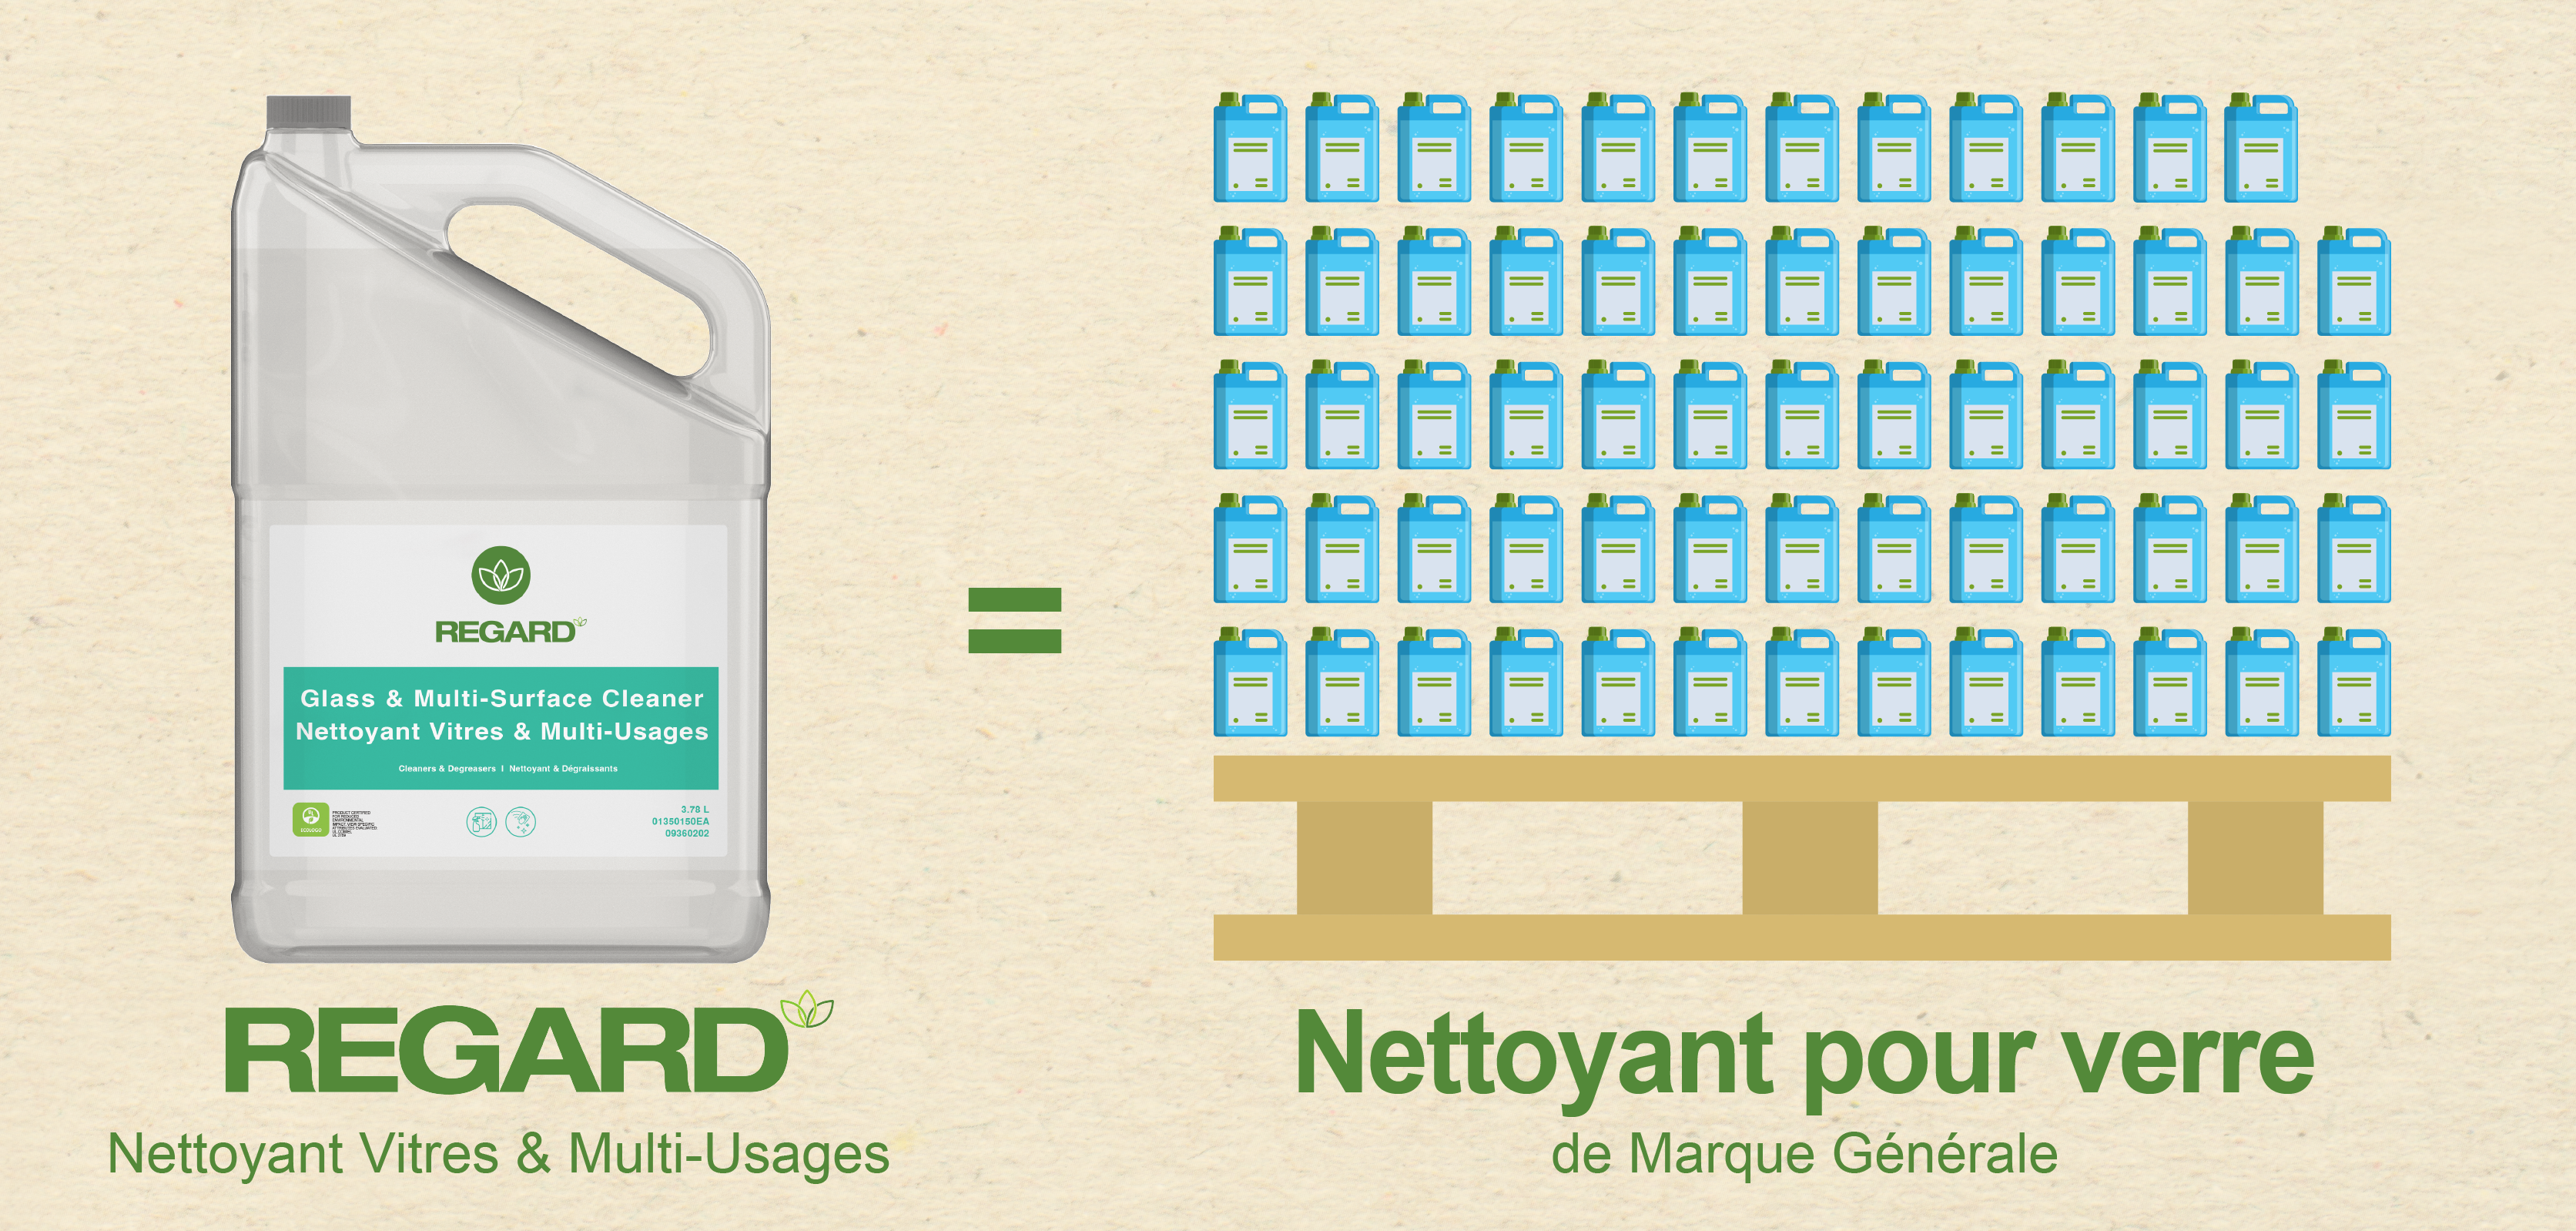 The French version of a simplified comparison between Regard Eco-Friendlier Cleaning Solutions' Glass & Multi-Surface Cleaner and a generic brand glass cleaner.